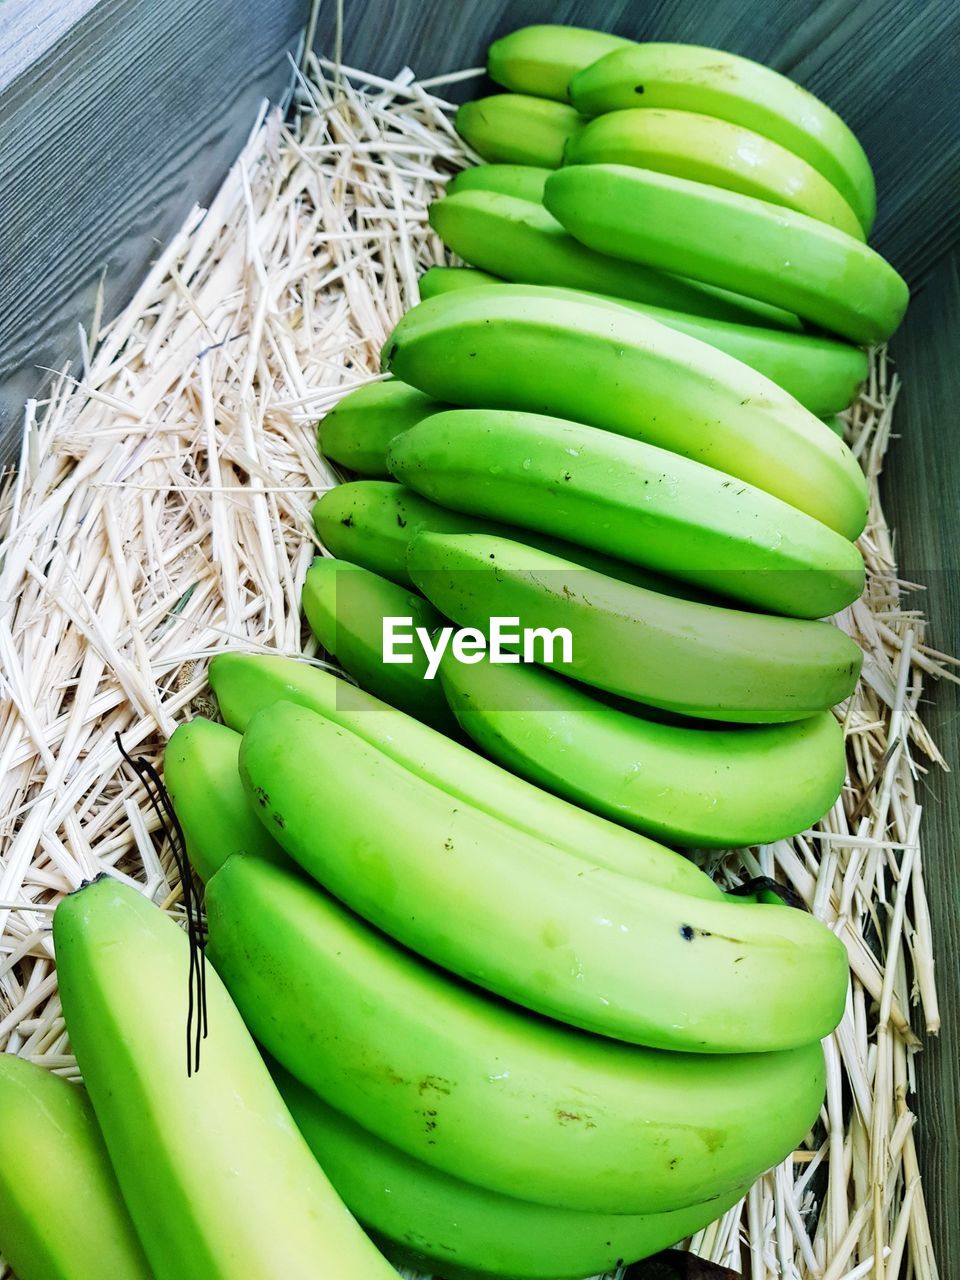 High angle view of unripe bananas in basket